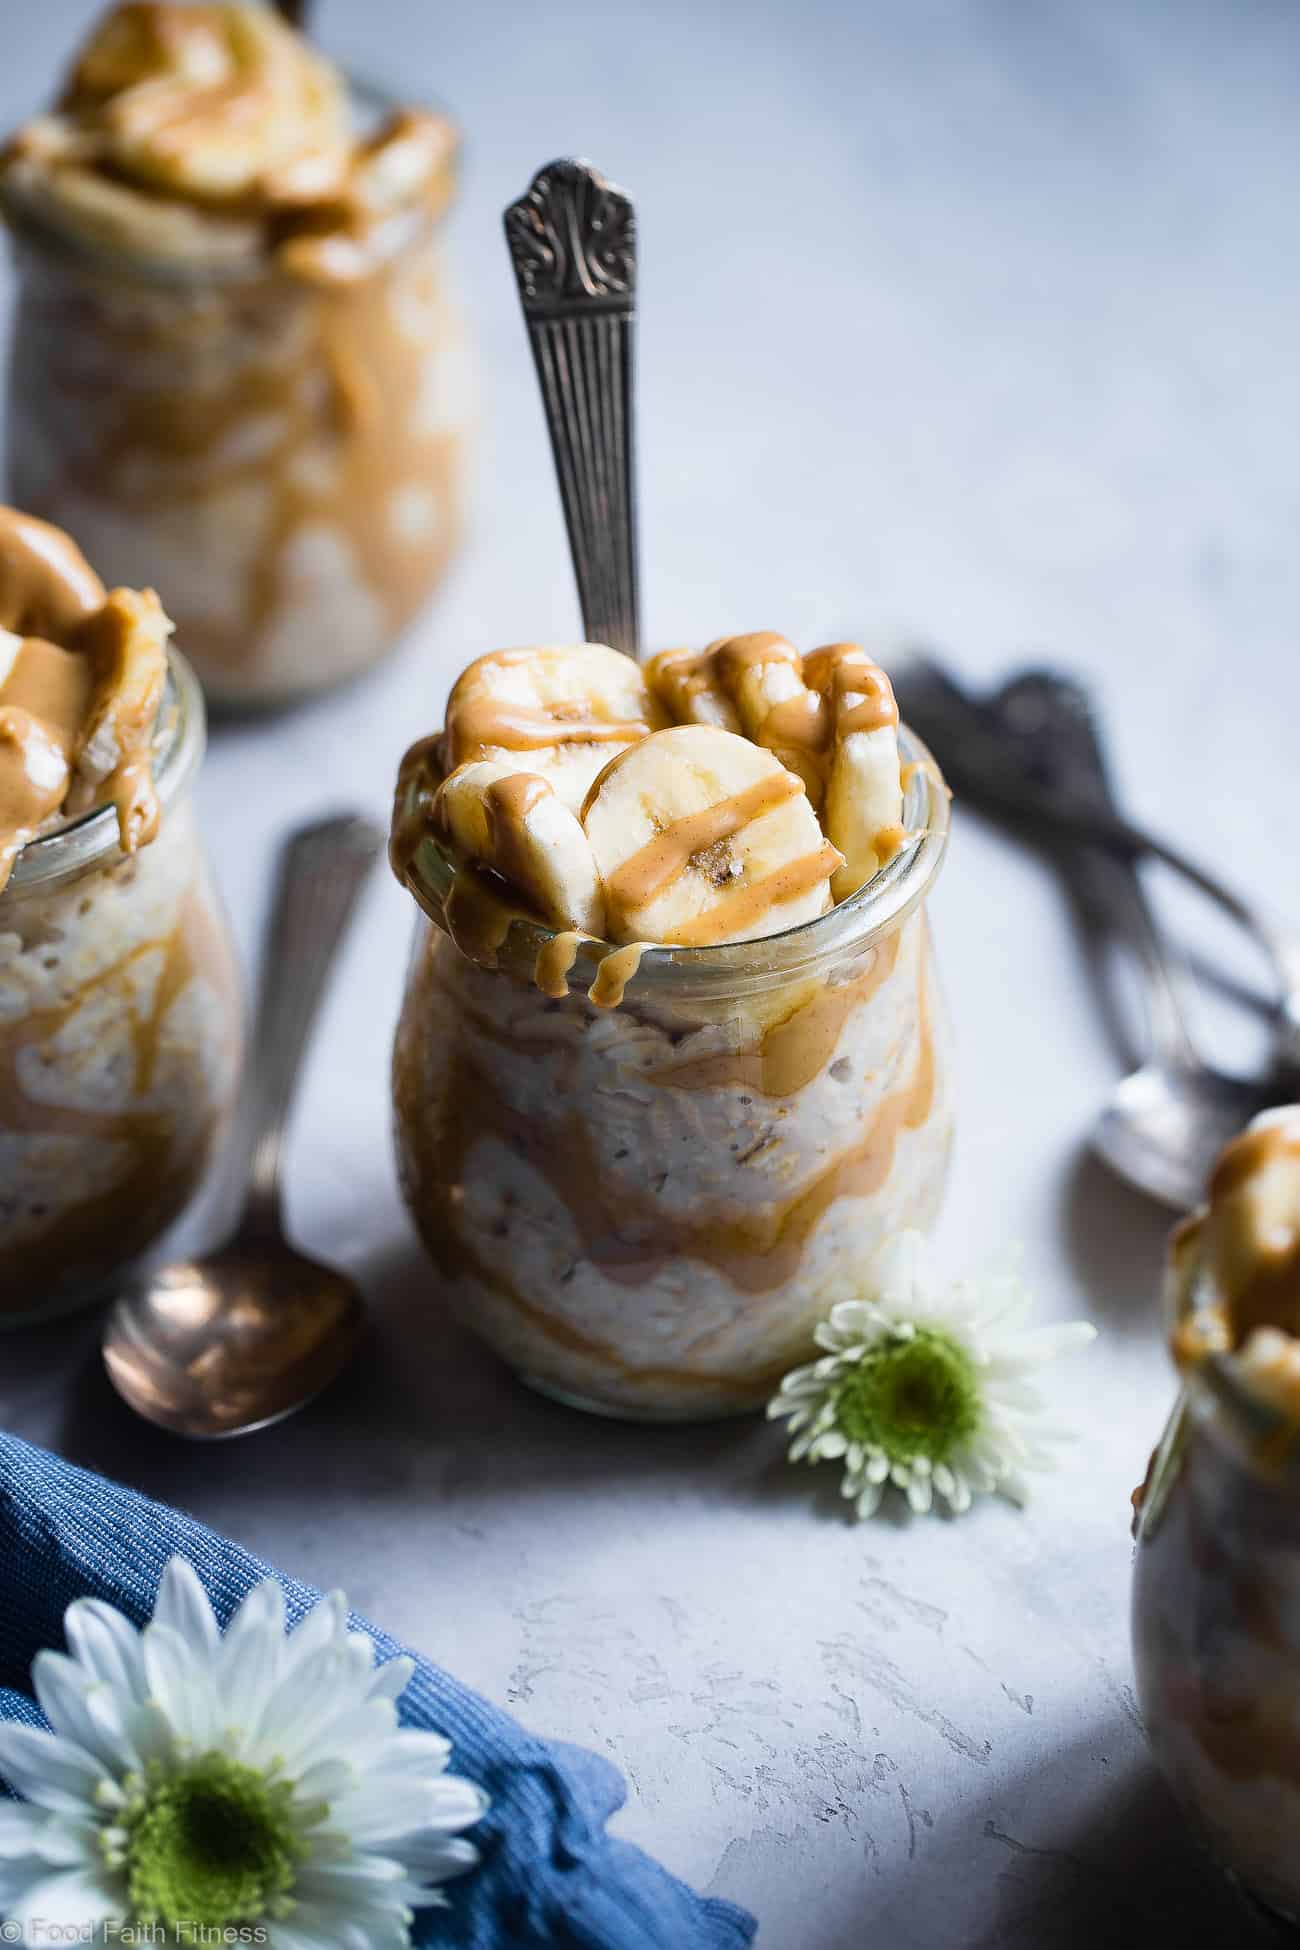 Banana Overnight Peanut Butter Oats - This make ahead, vegan overnight oats recipe is a healthy, 4 ingredient way to start the day! dairy, sugar and, gluten free and kid friendly too! | Foodfaithfitness.com | @FoodFaithFit